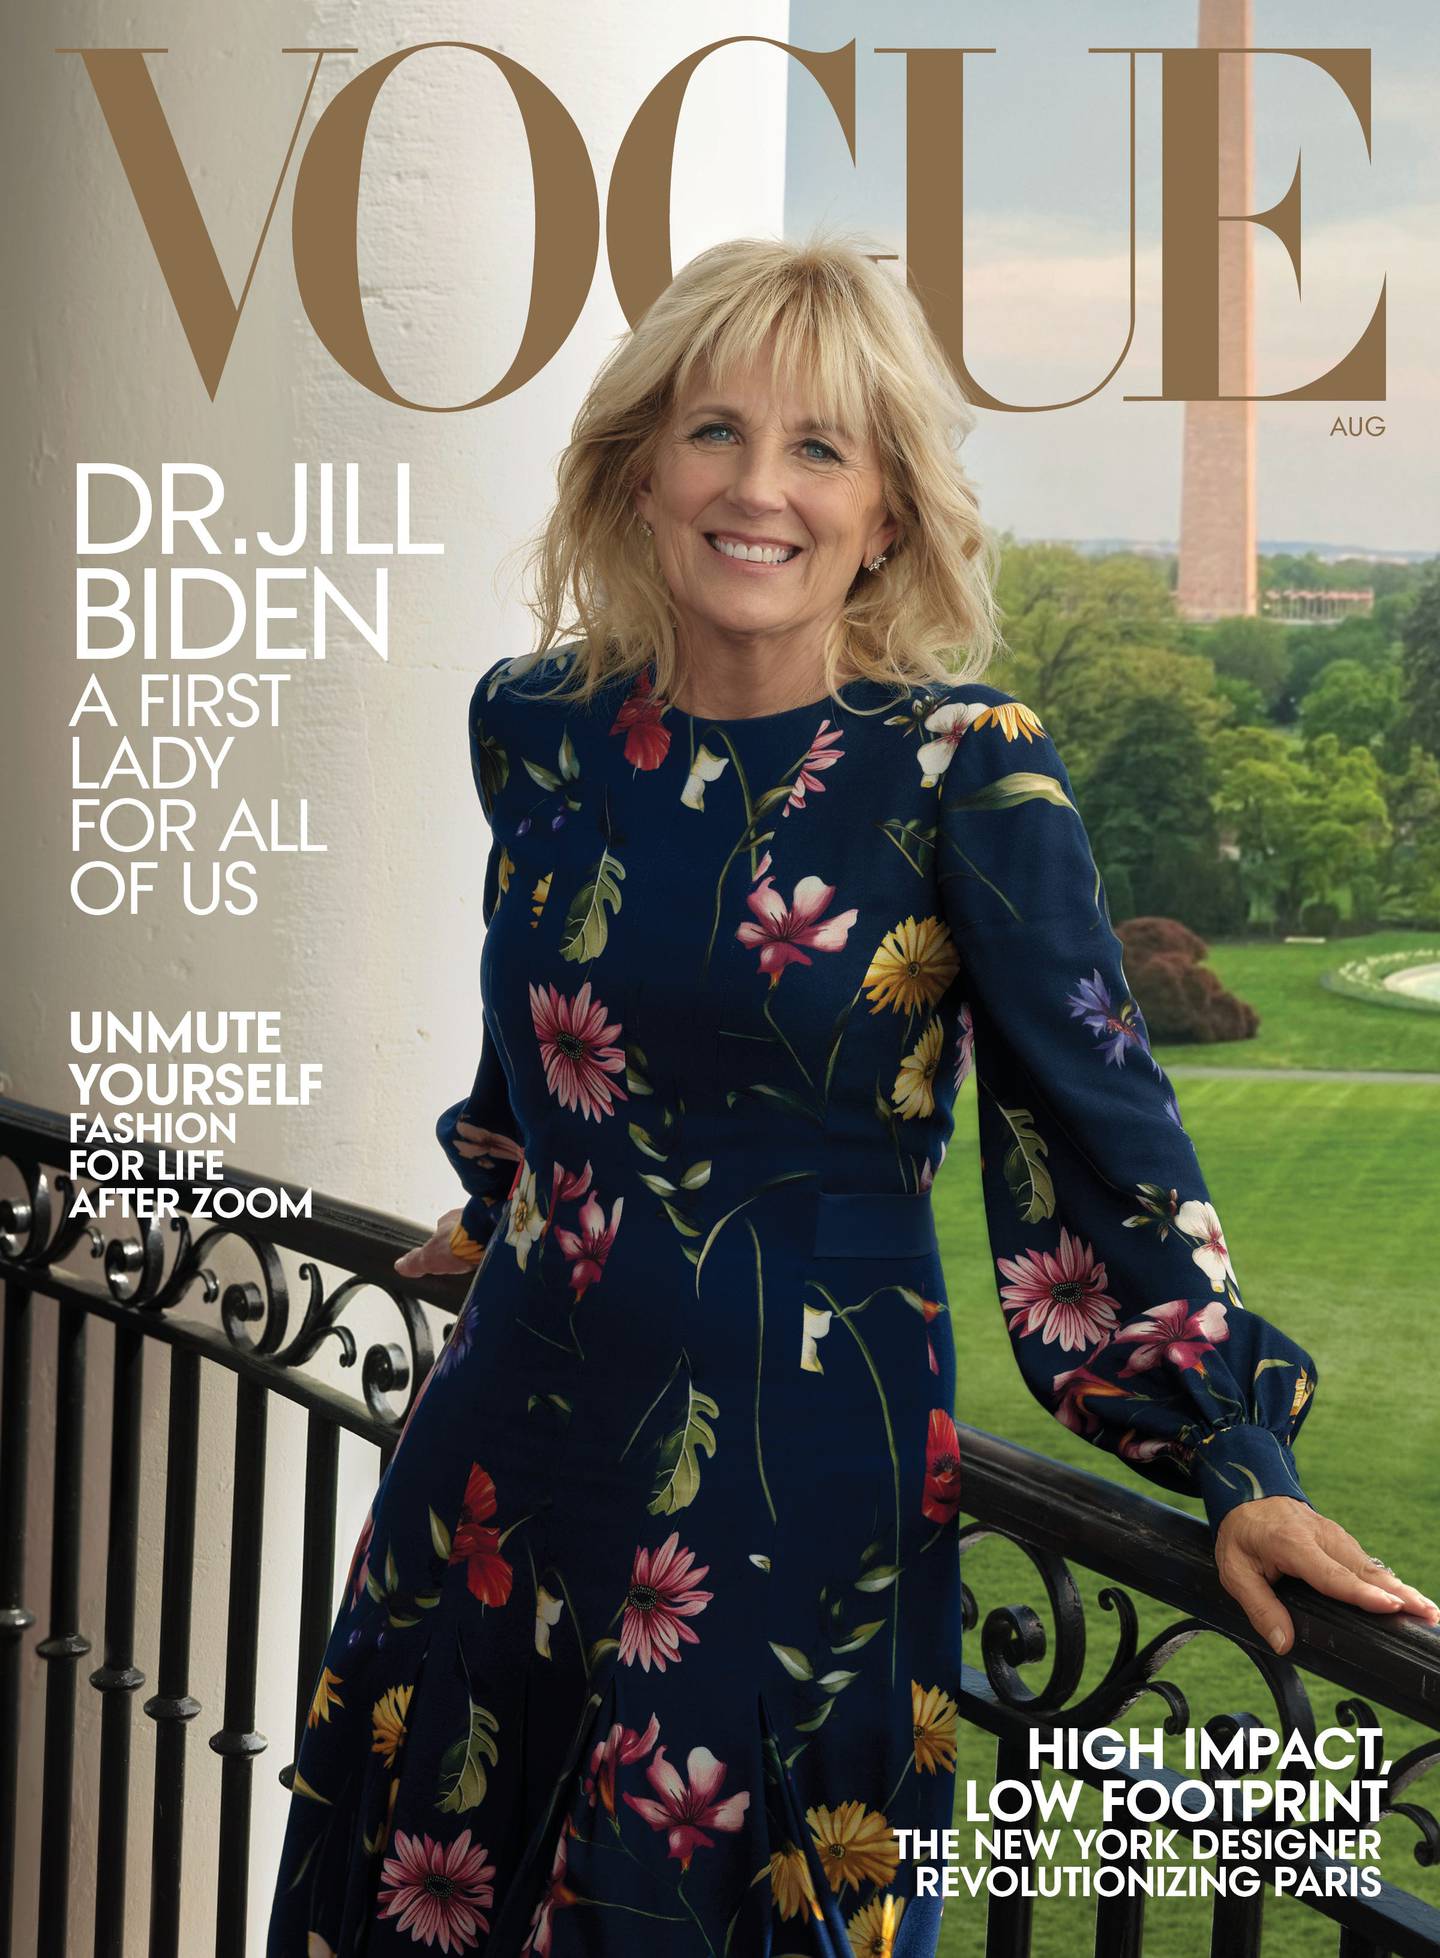 First Lady Dr. Jill Biden on the cover of Vogue photographed by Annie Leibovitz. Courtesy